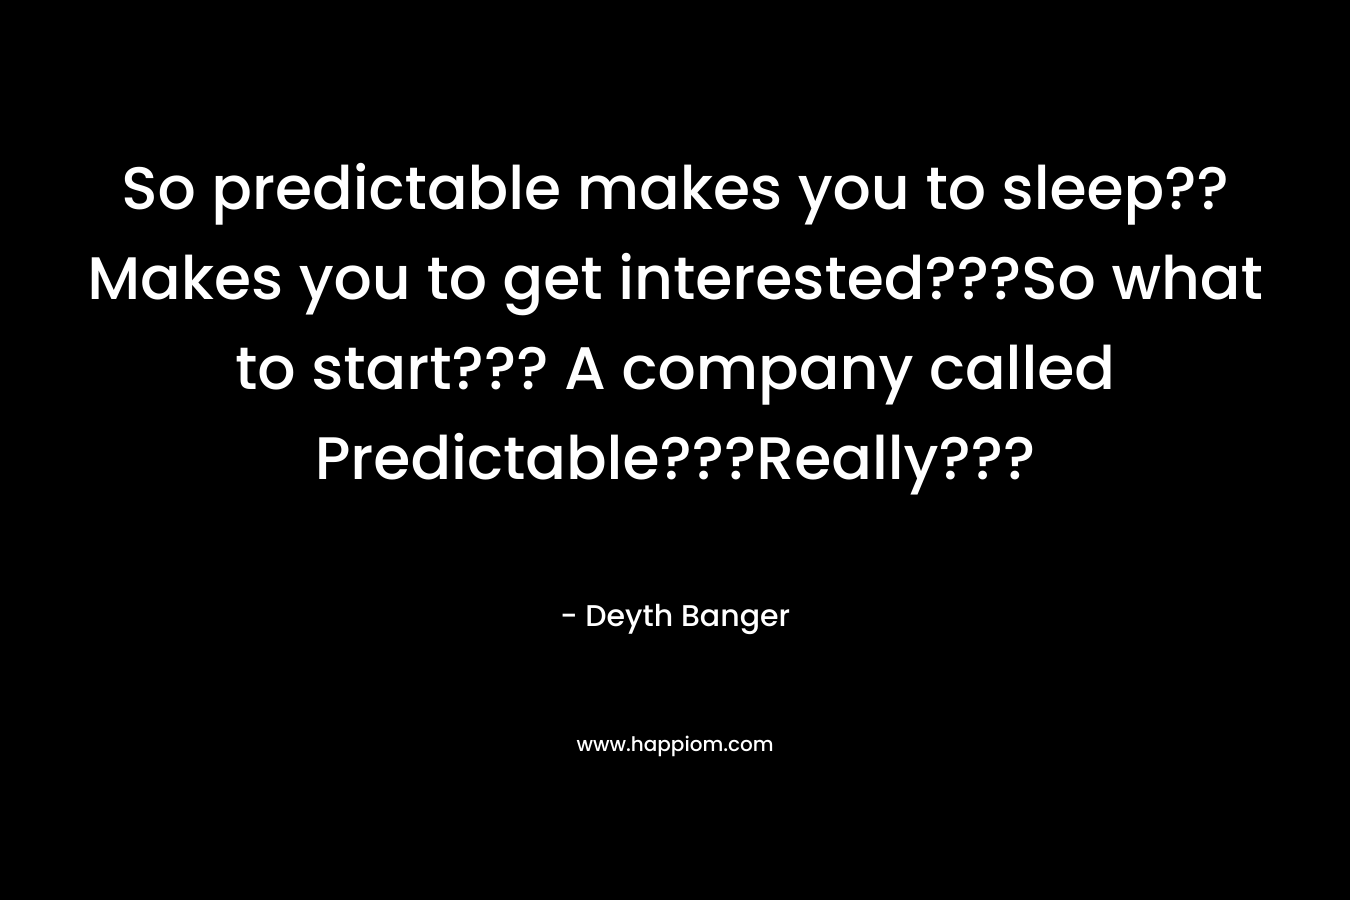 So predictable makes you to sleep??Makes you to get interested???So what to start??? A company called Predictable???Really???